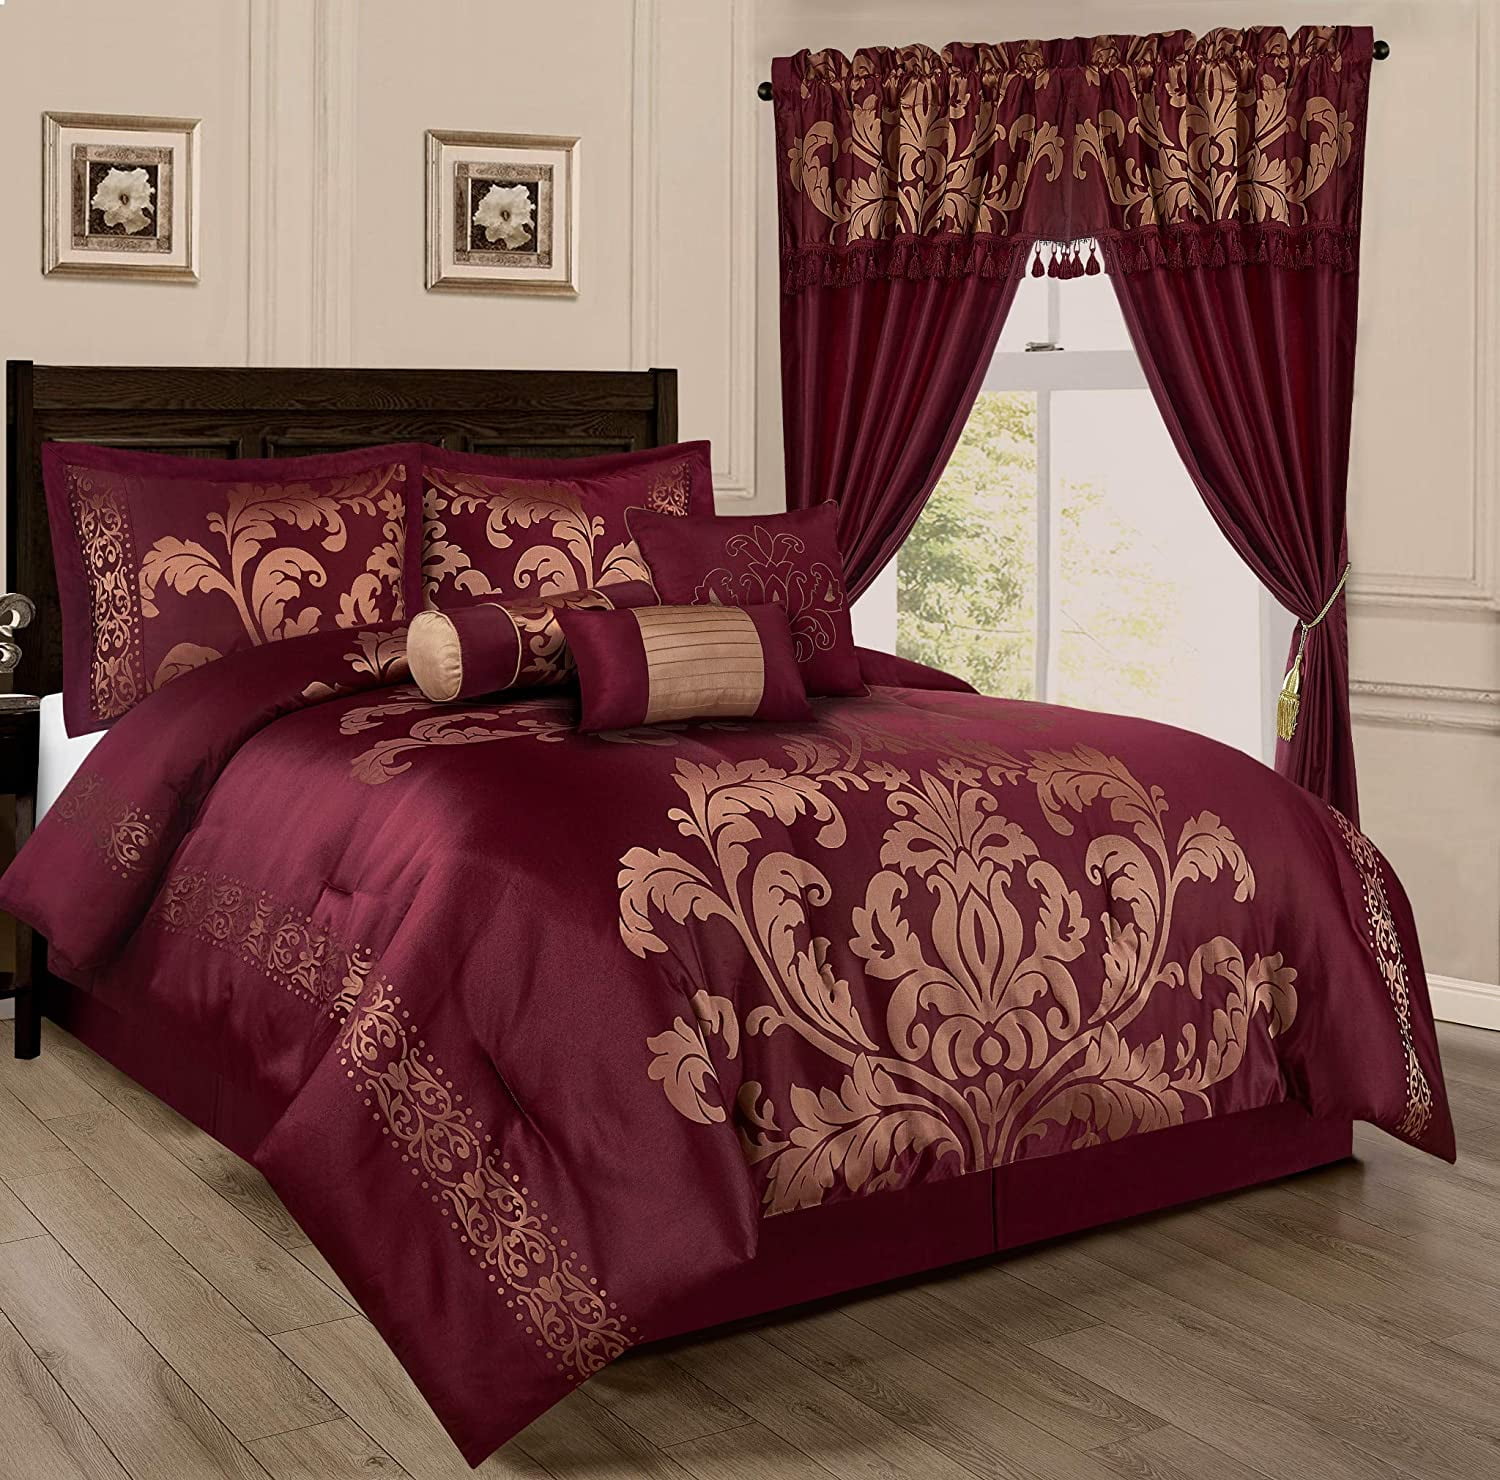 Deluxe Silky Jacquard Gold Tone Floral 7 pcs King Queen Comforter or Curtain Set 